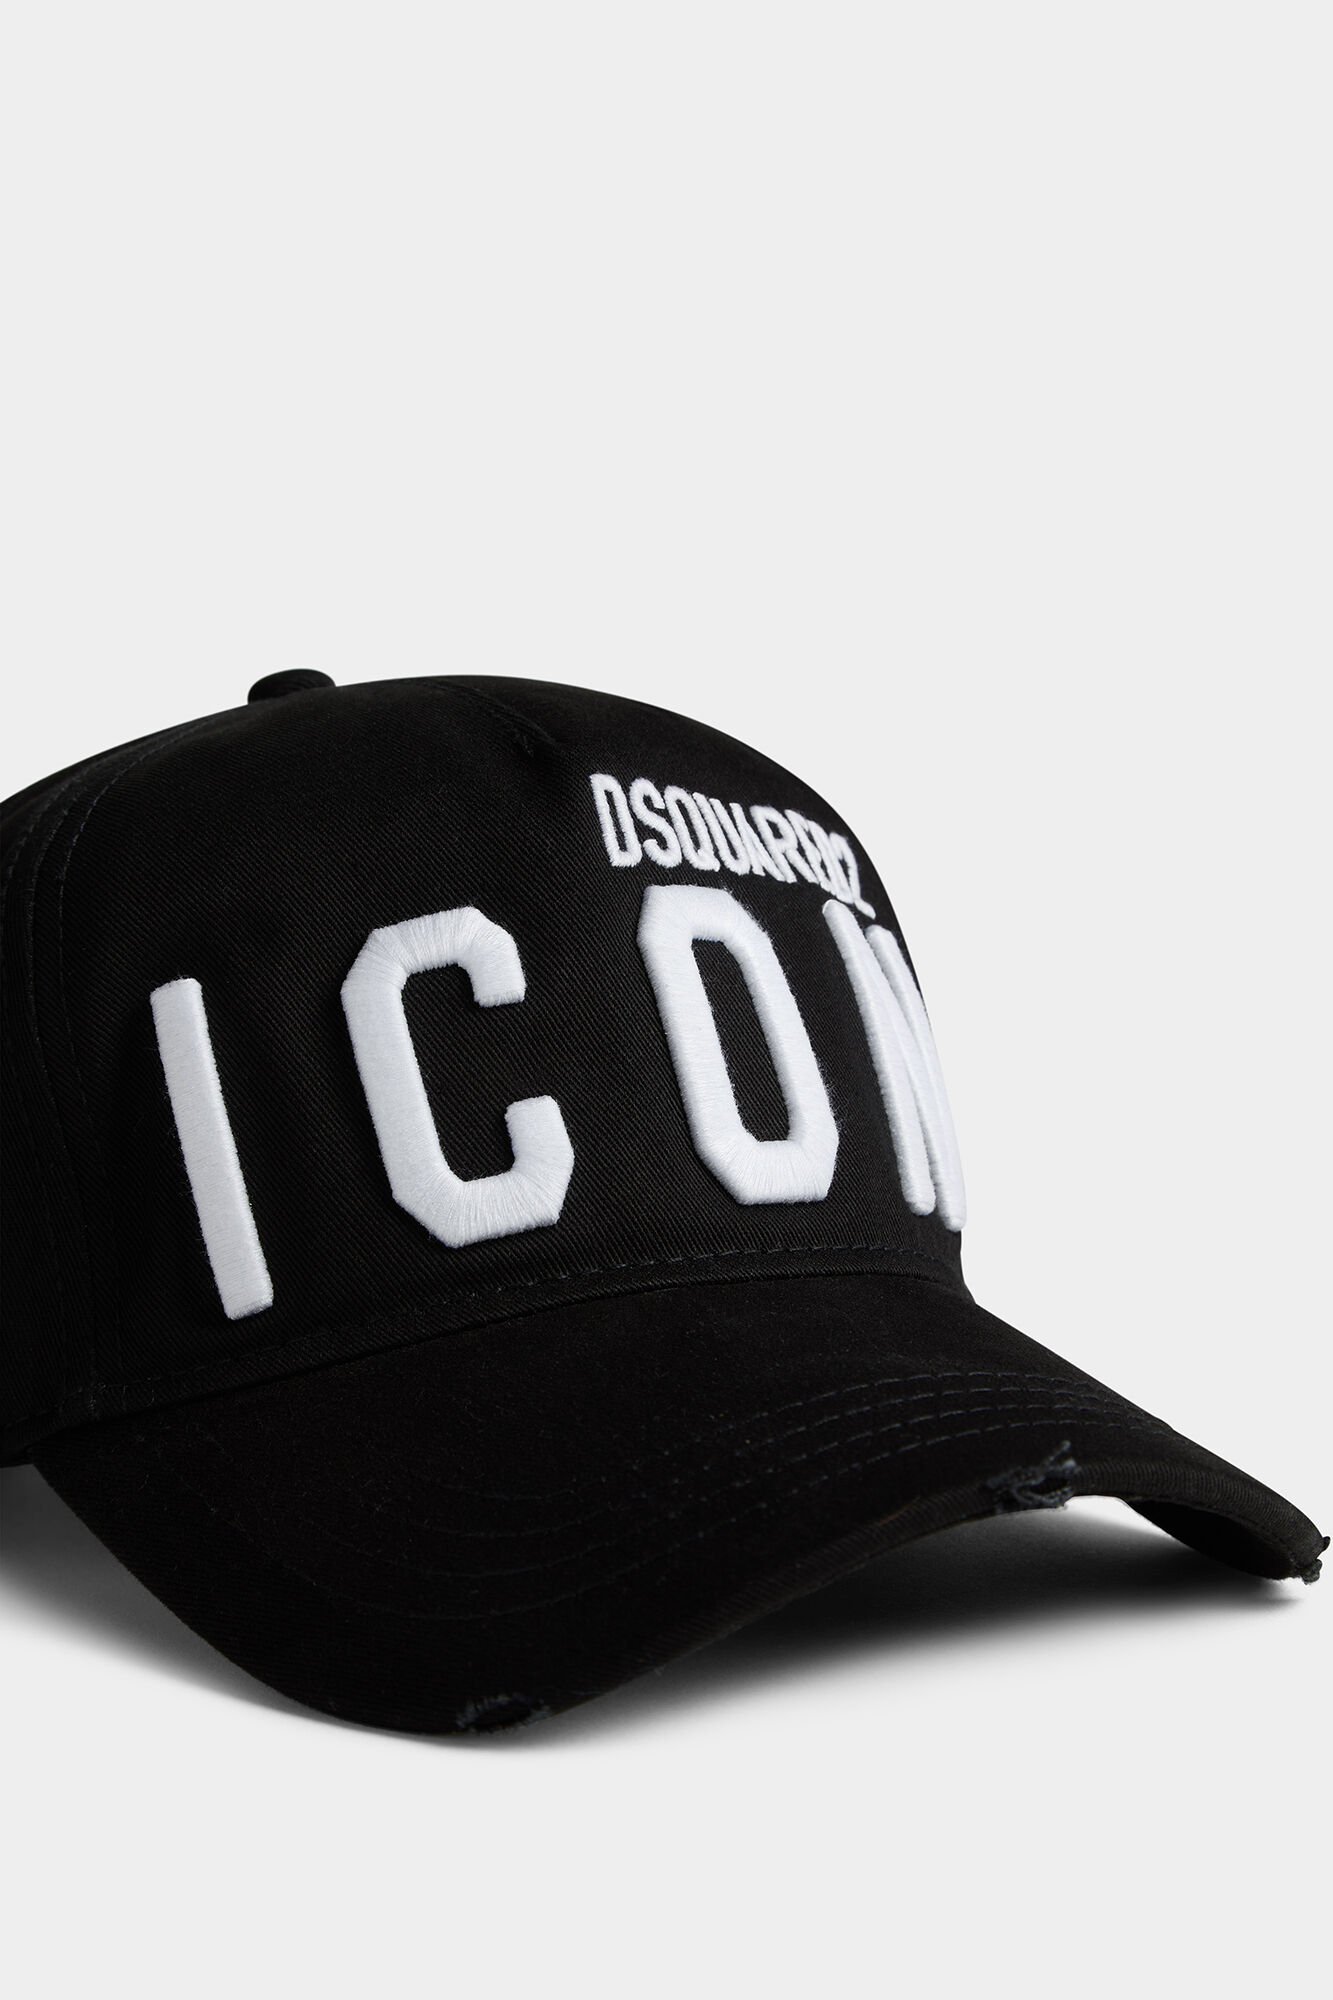 Icon Hats | DSQUARED2.